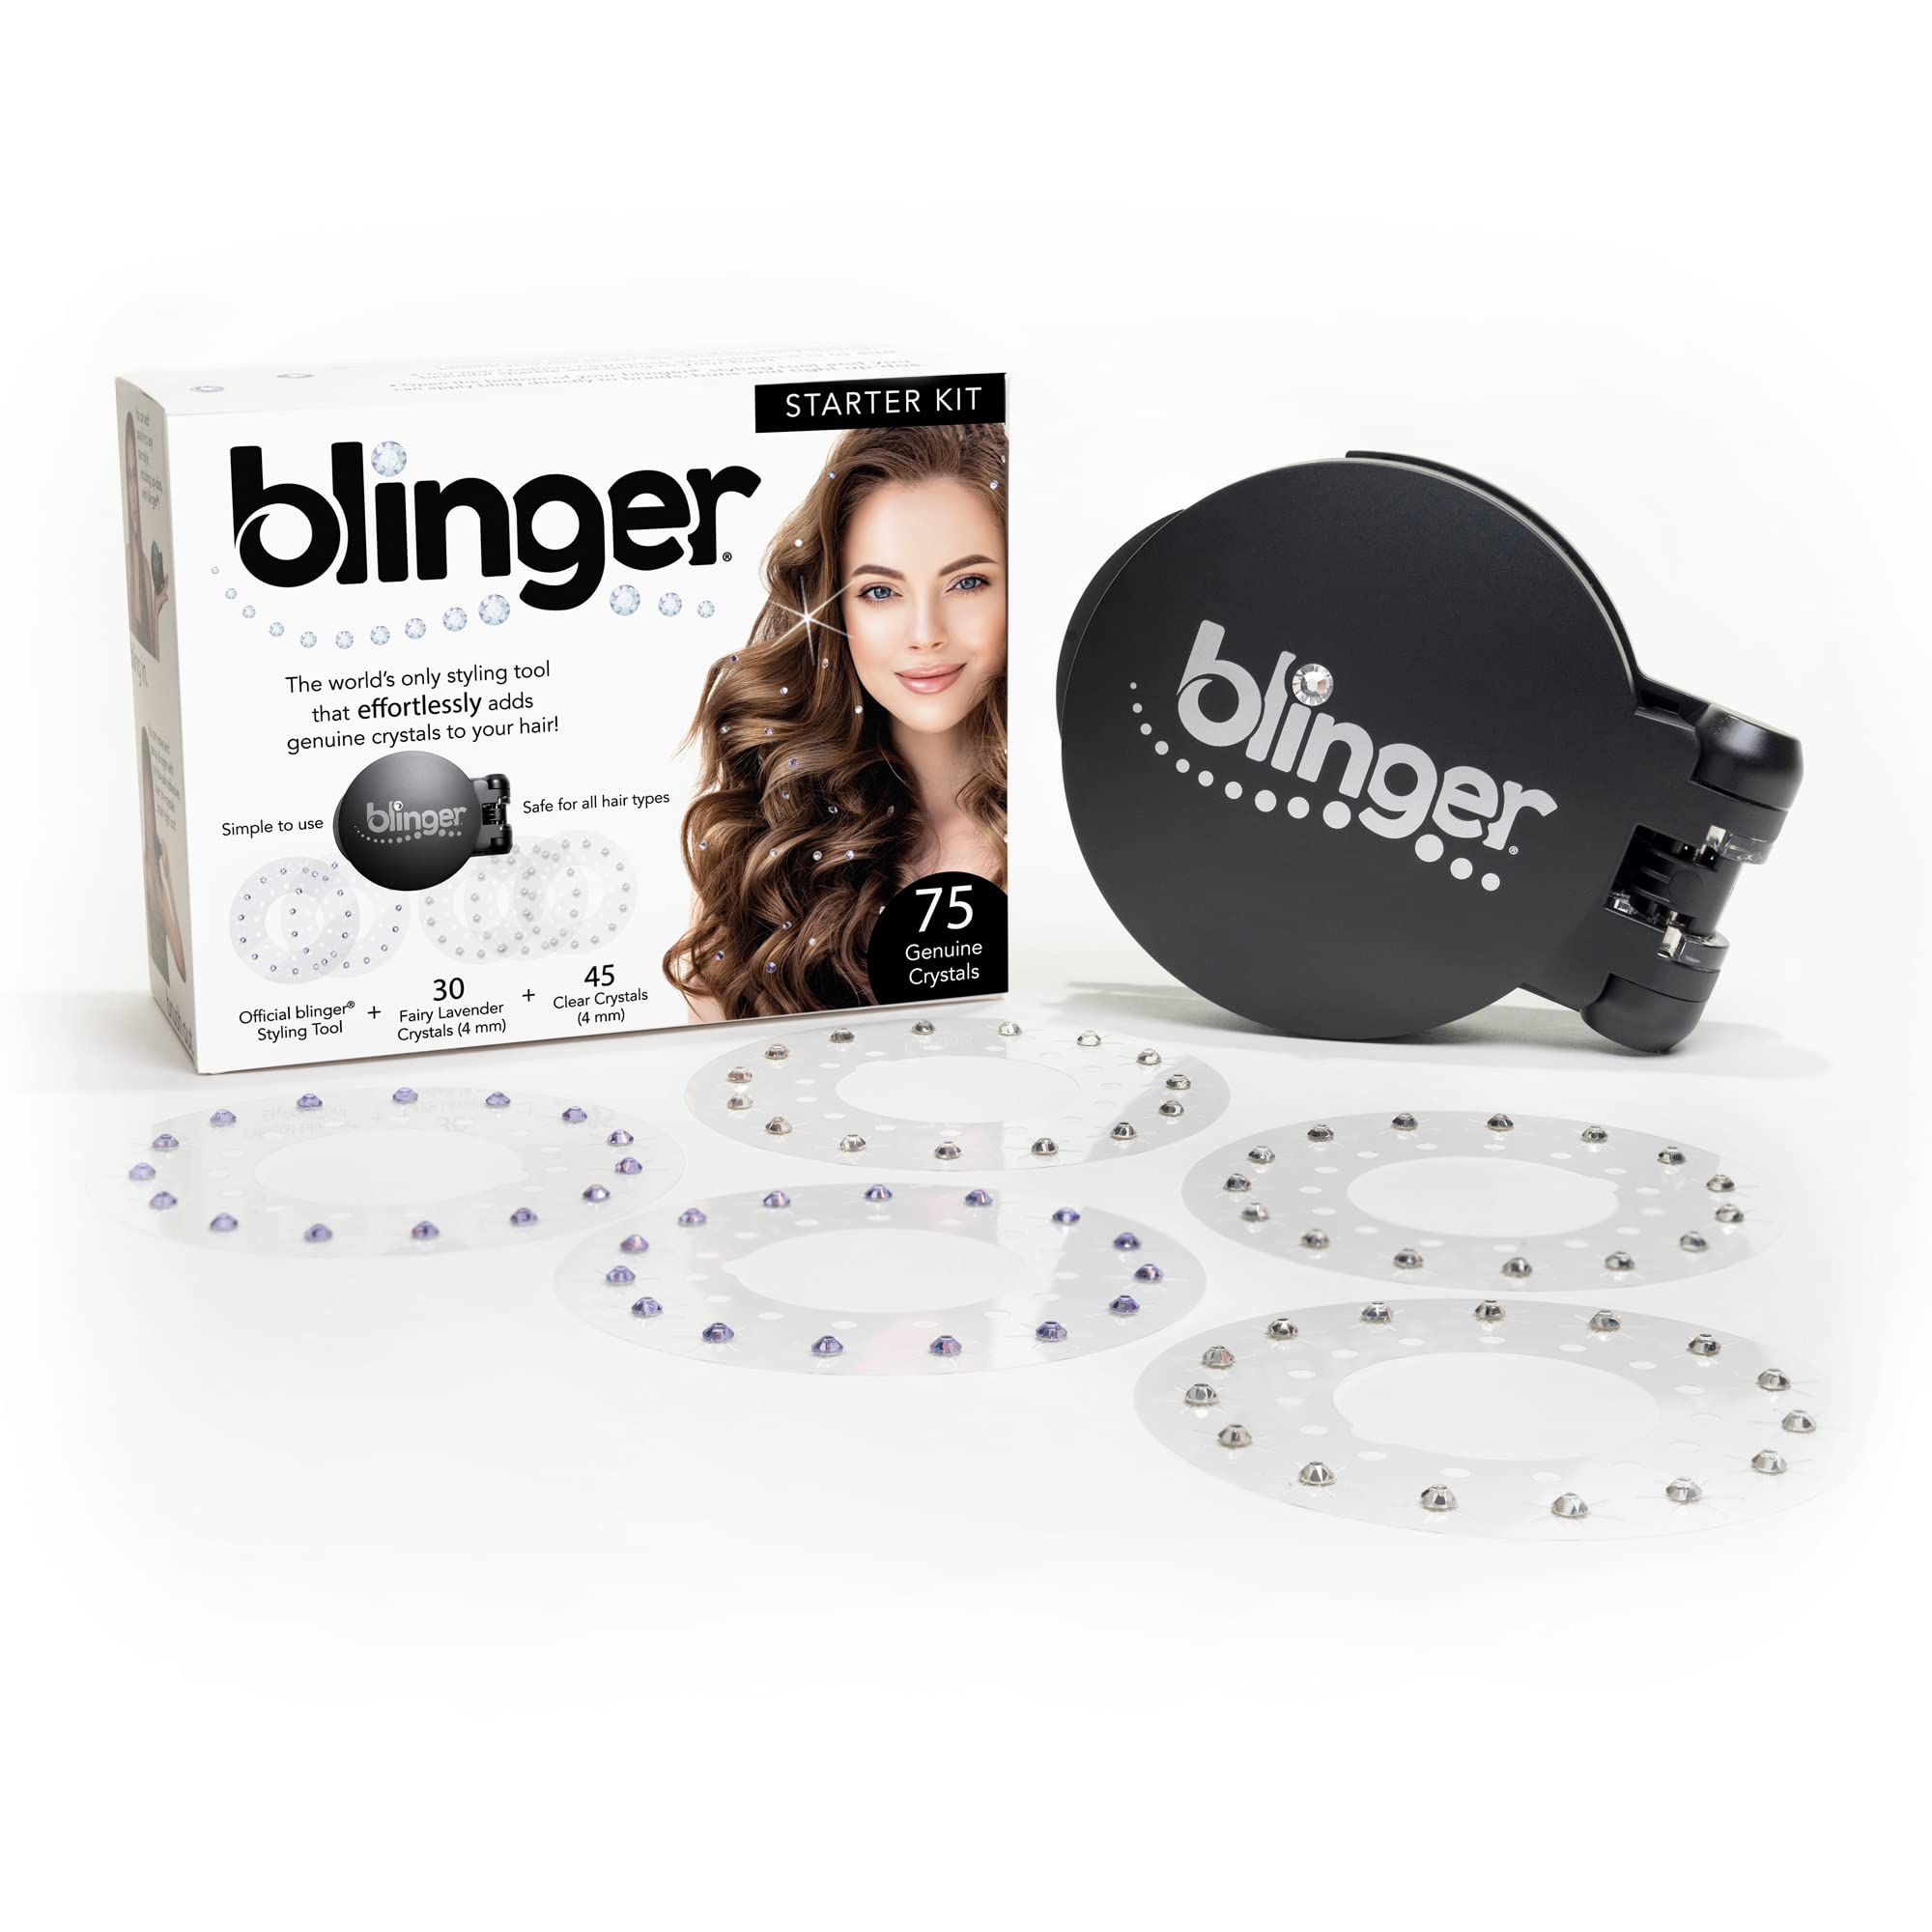 blinger Starter Kit | Women's Hair Styling Tool + 75 Precision-Cut Glass Crystals | Bling Hair in Seconds! Bedazzling Multi-Faceted Gems | Hair-Safe – Bling In Brush Out | By Blinger Kids Inventor